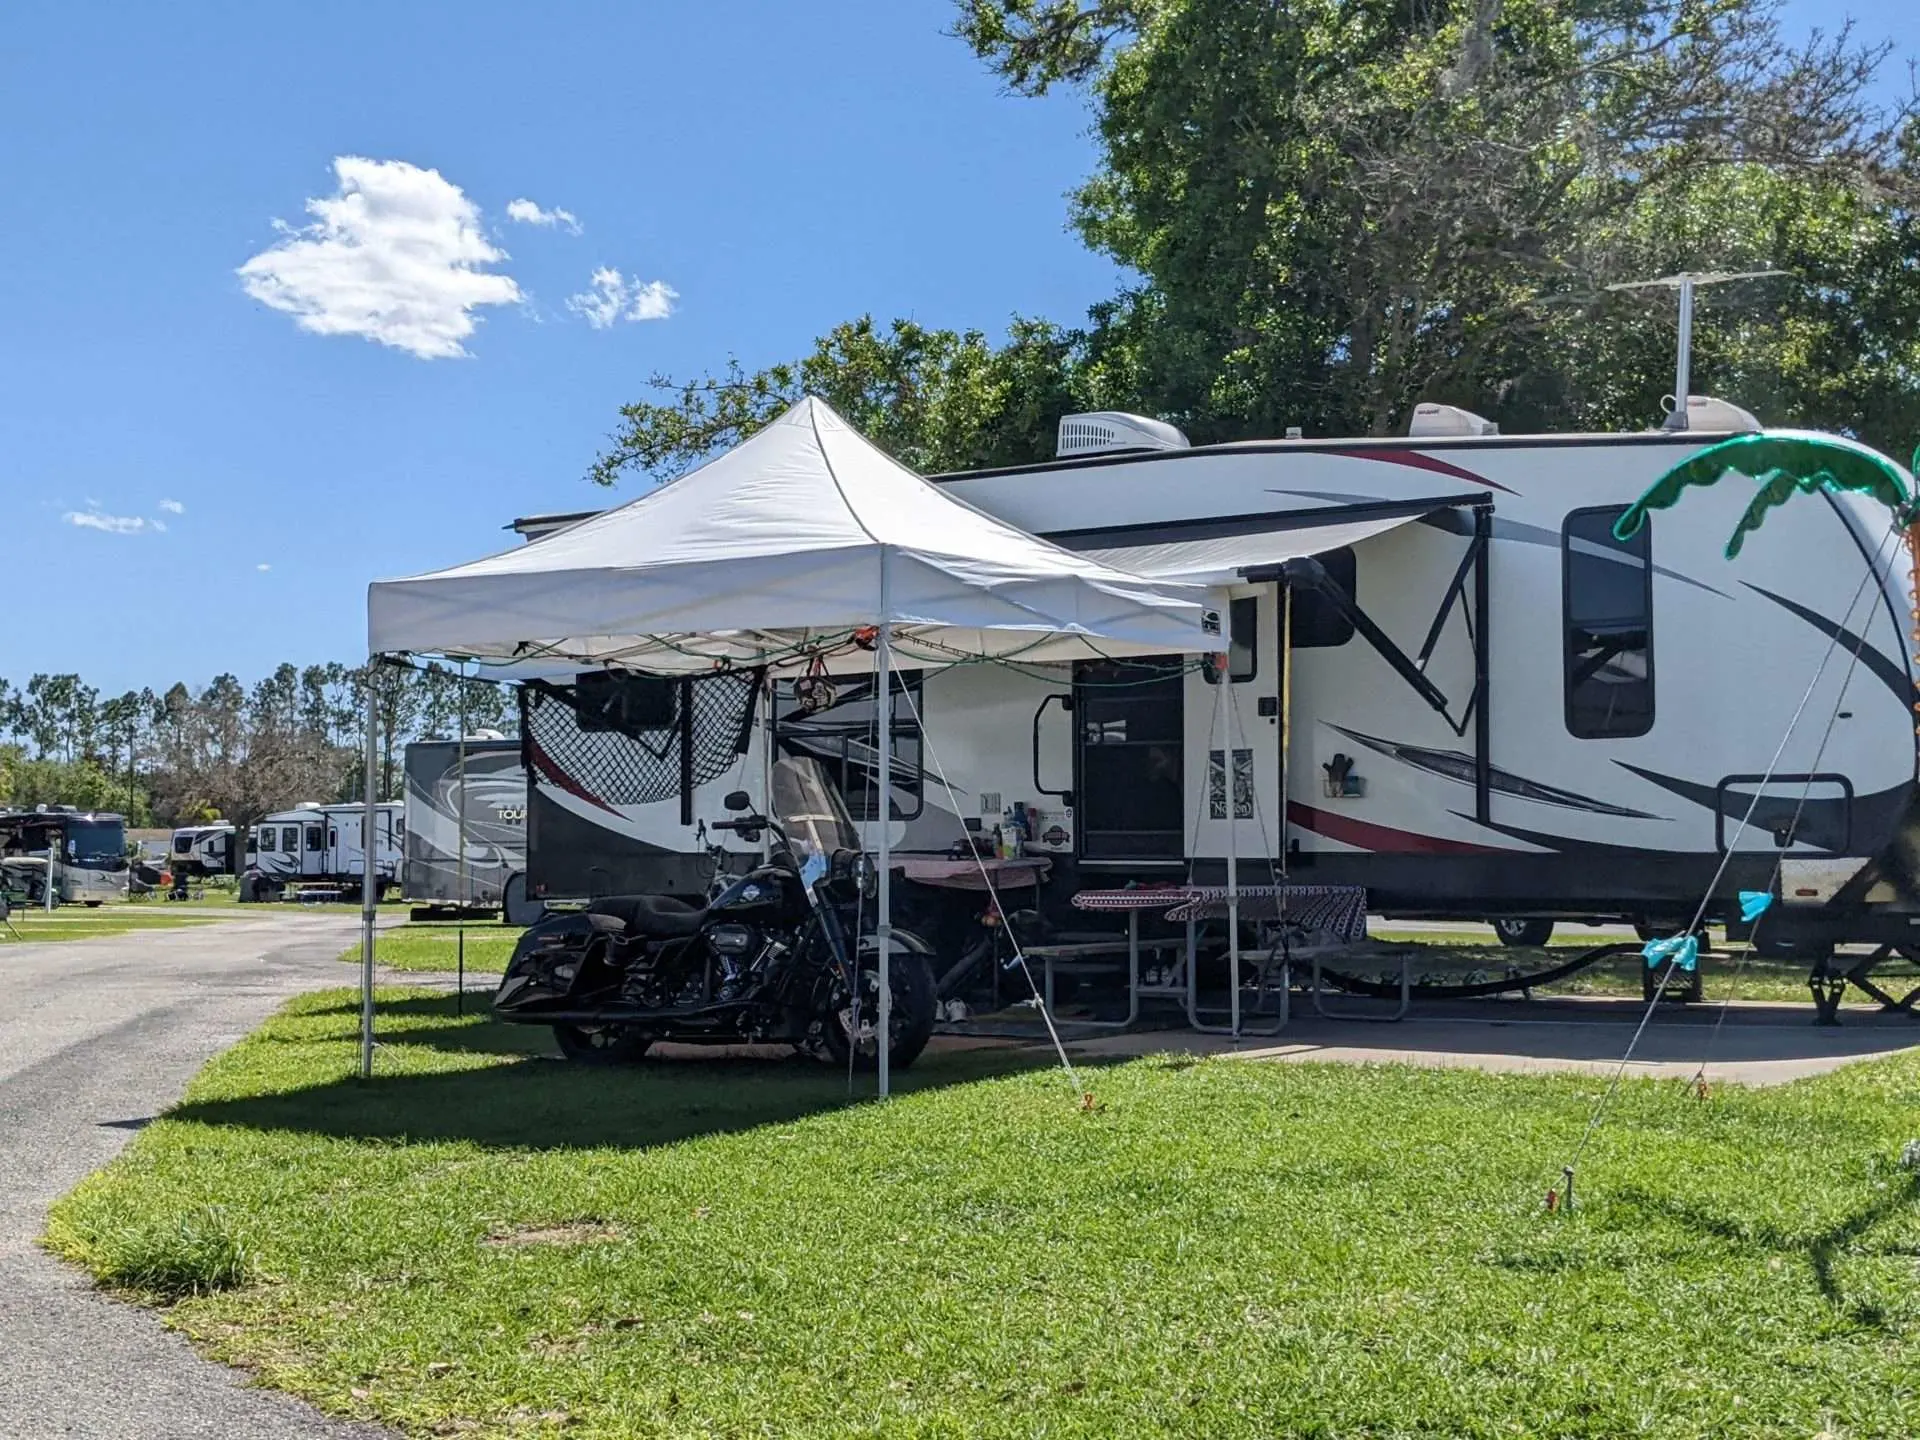 RV with external campsite set up in campground.